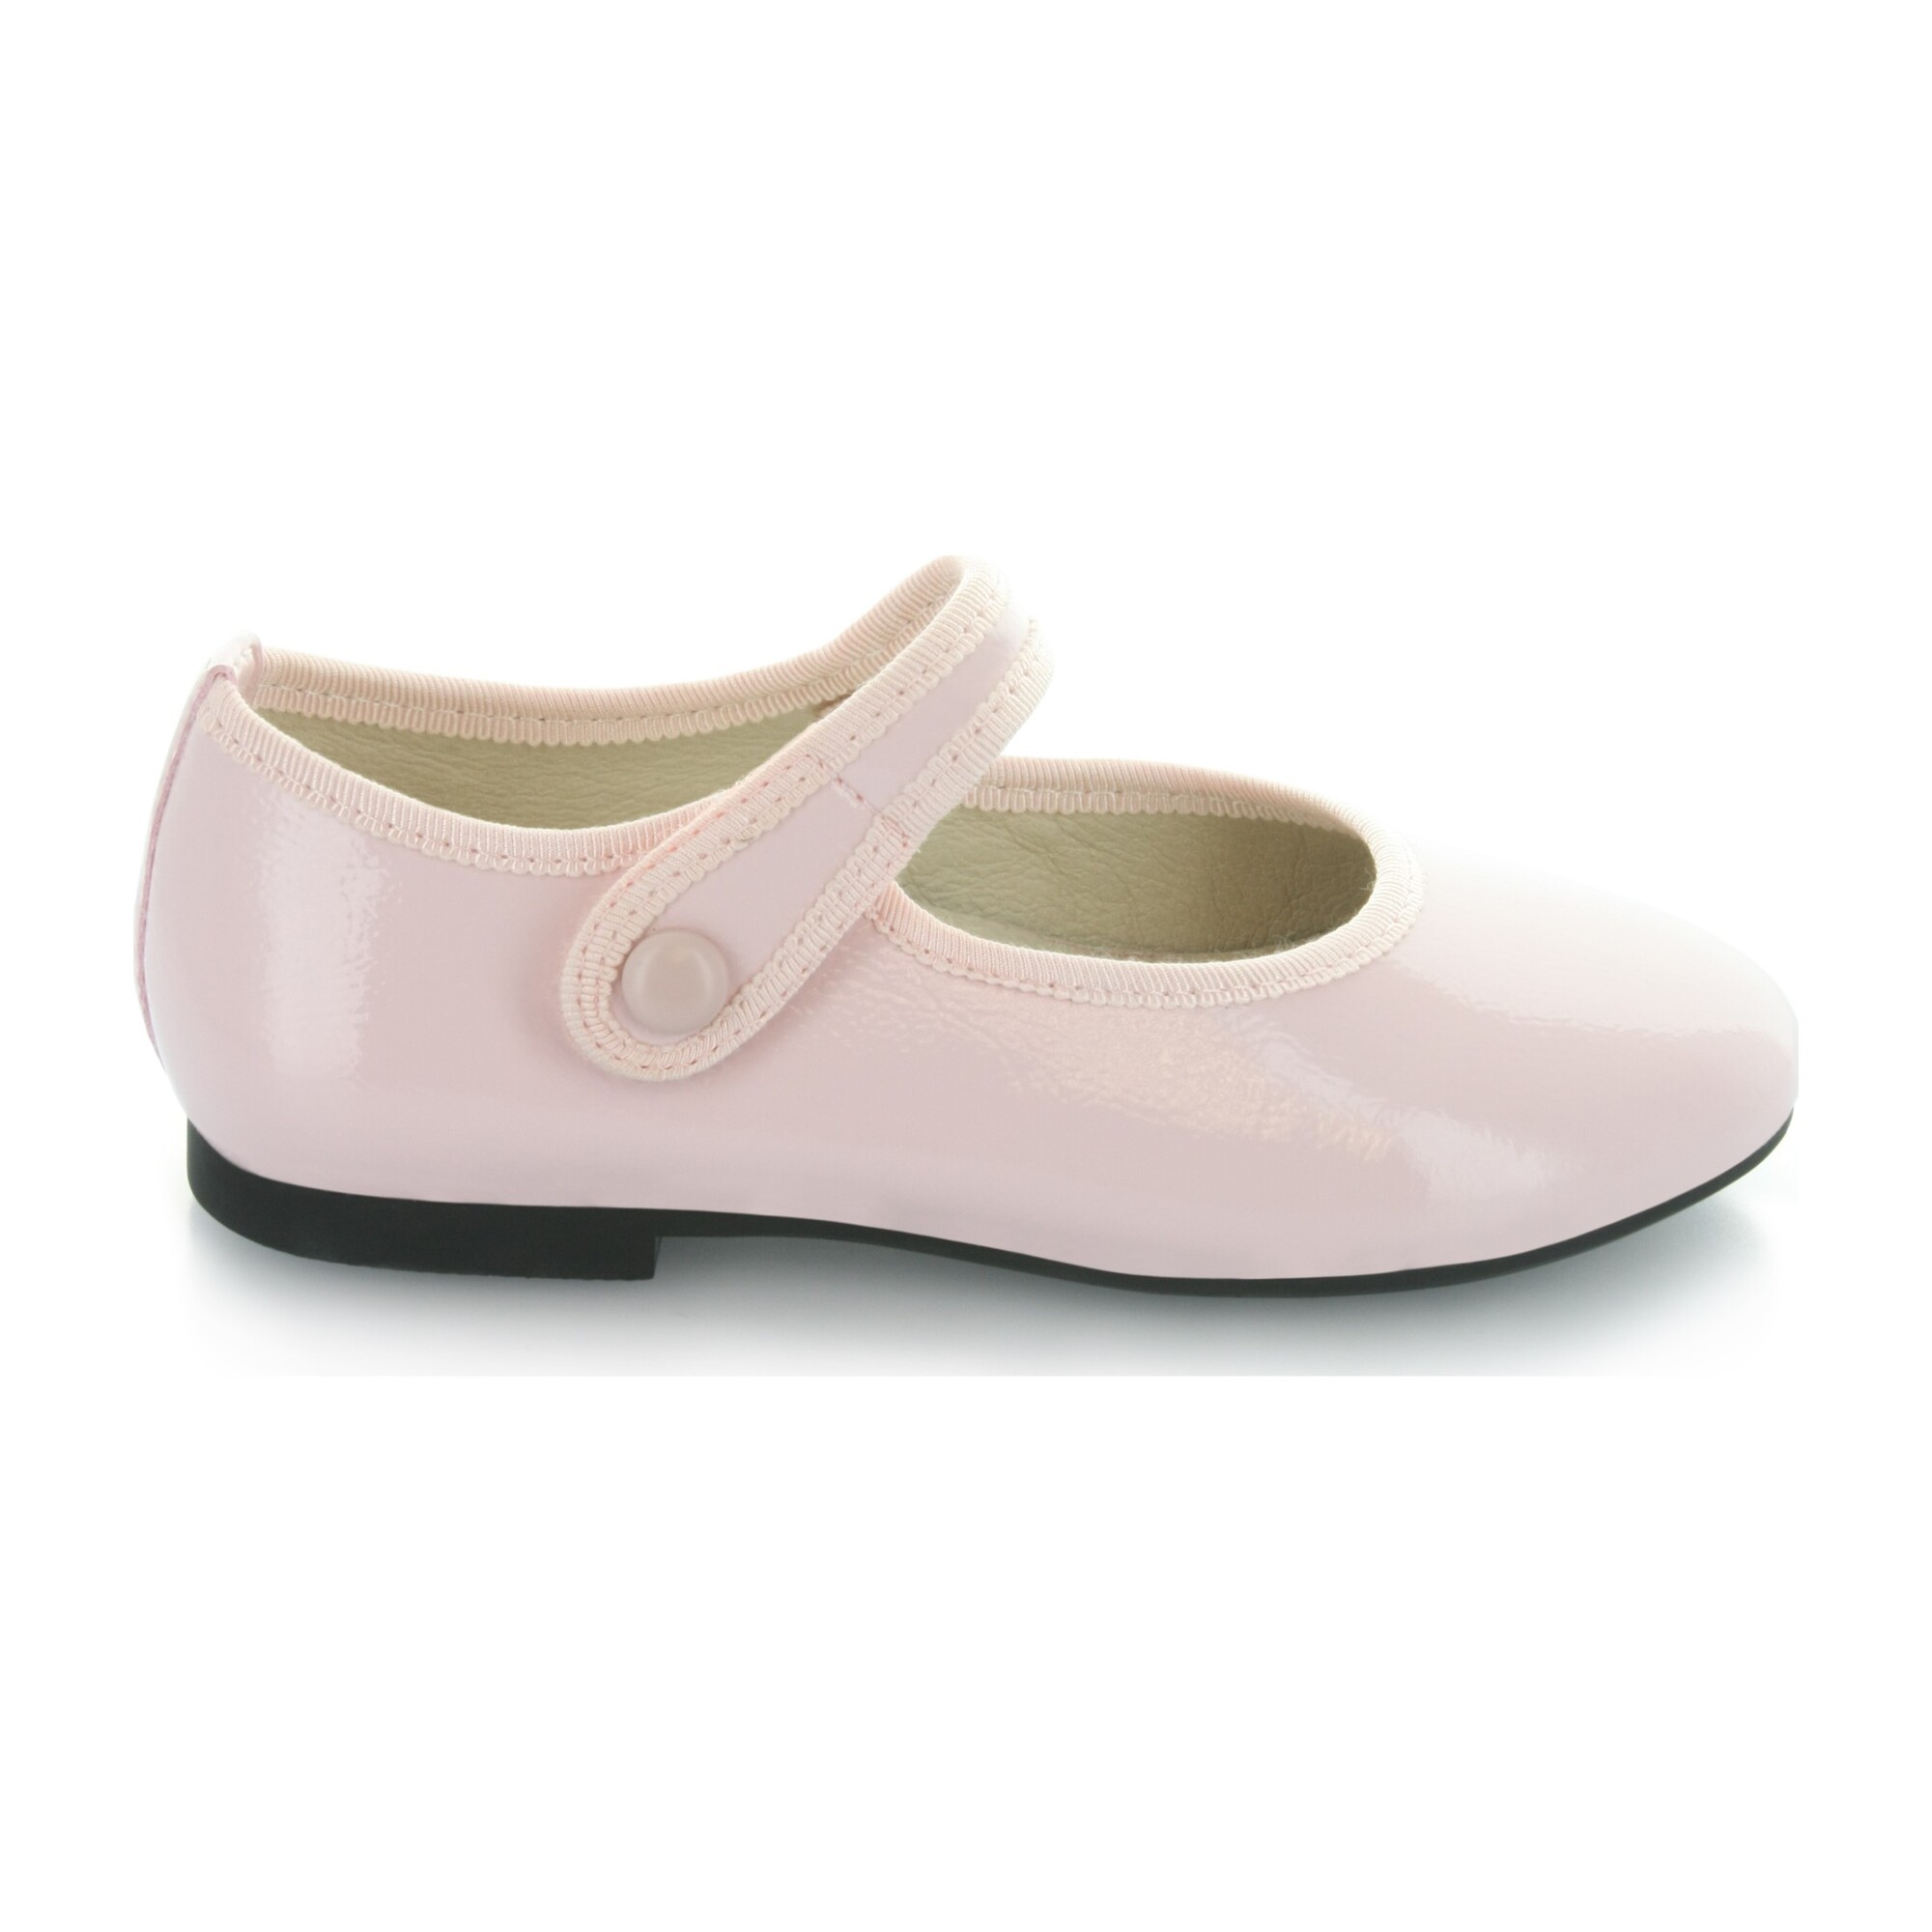 pale pink mary jane shoes